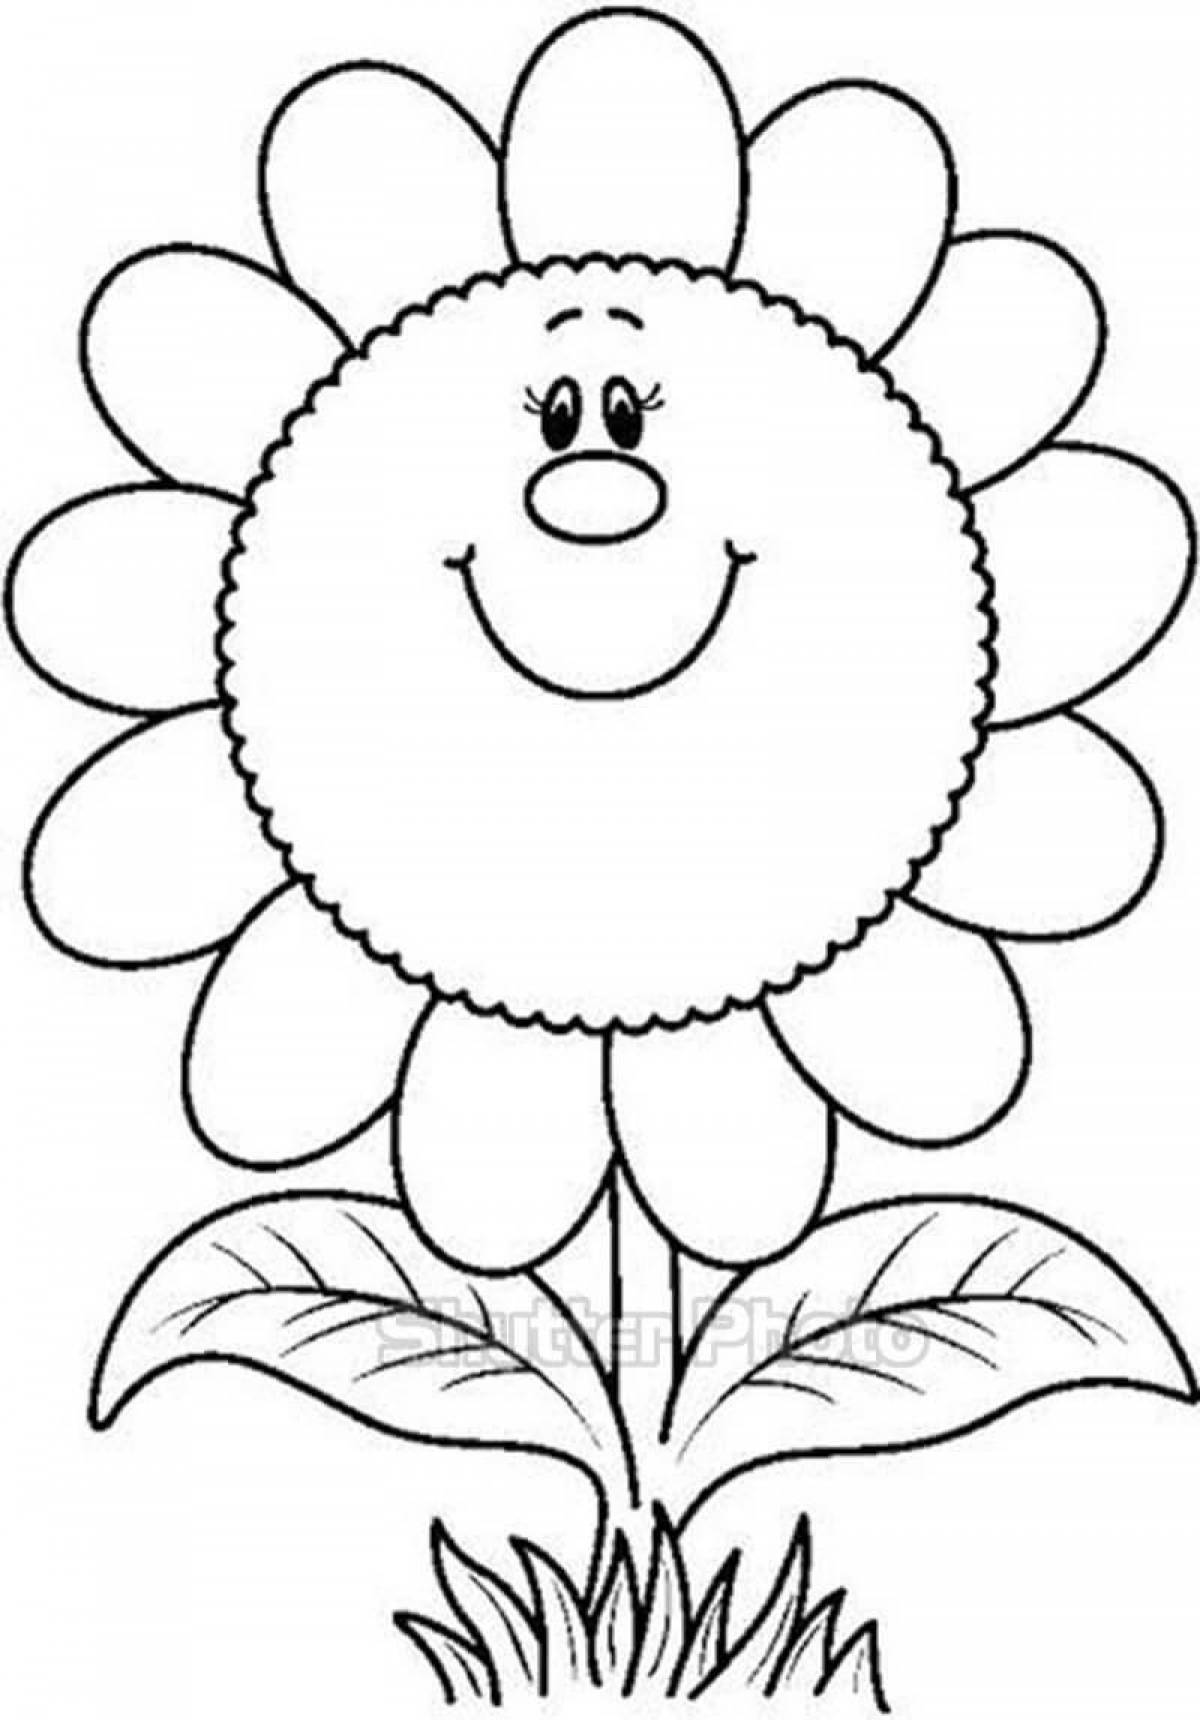 Amazing flower picture coloring book for kids